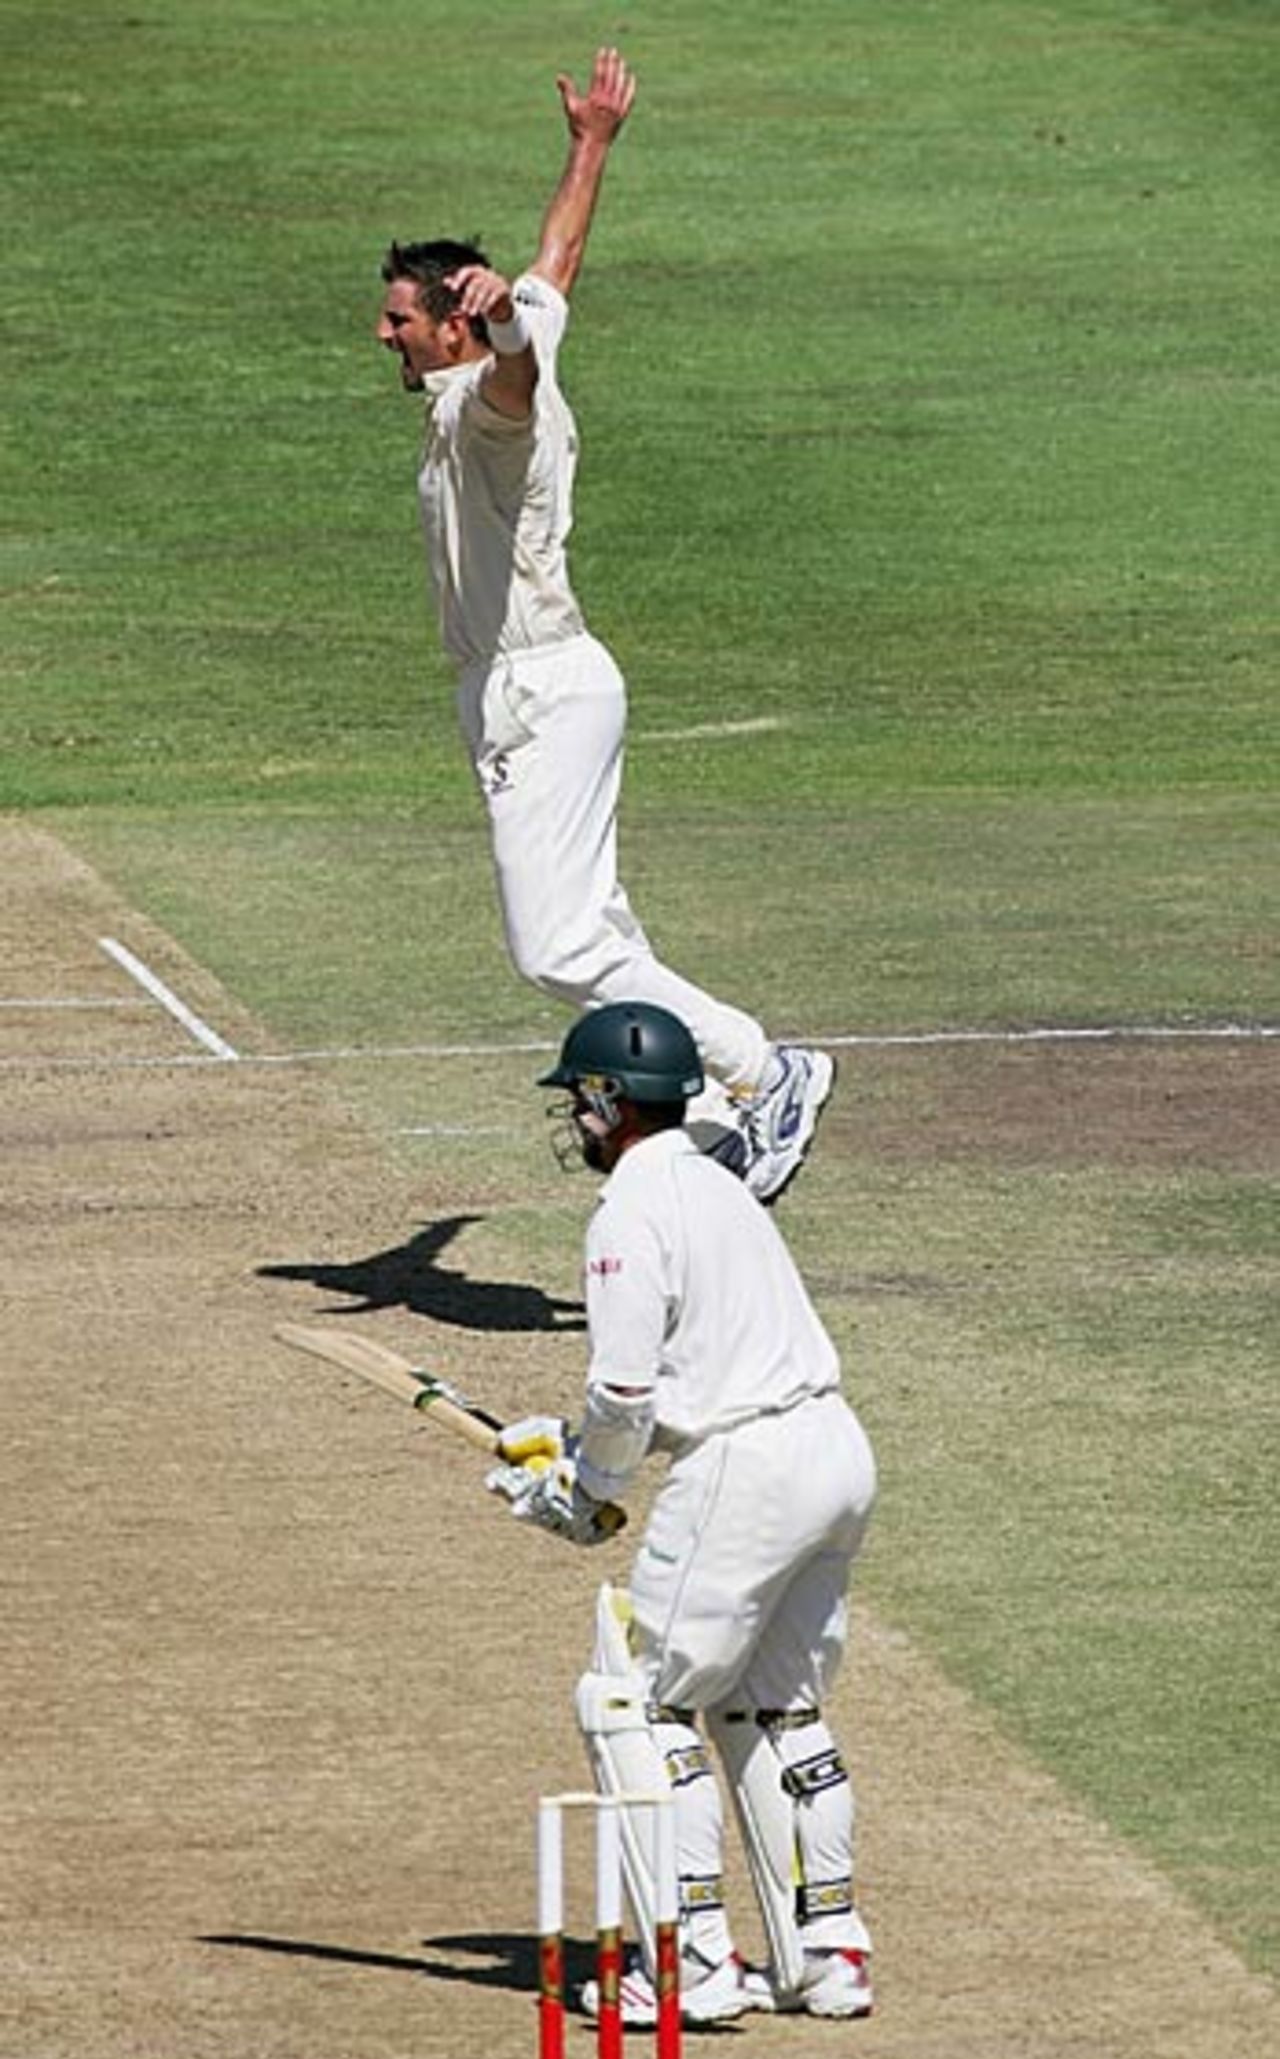 Michael Kasprowicz celebrates removing Mark Boucher as South Africa slump further into trouble, South Africa v Australia, 1st Test, Cape Town, March 18, 2006